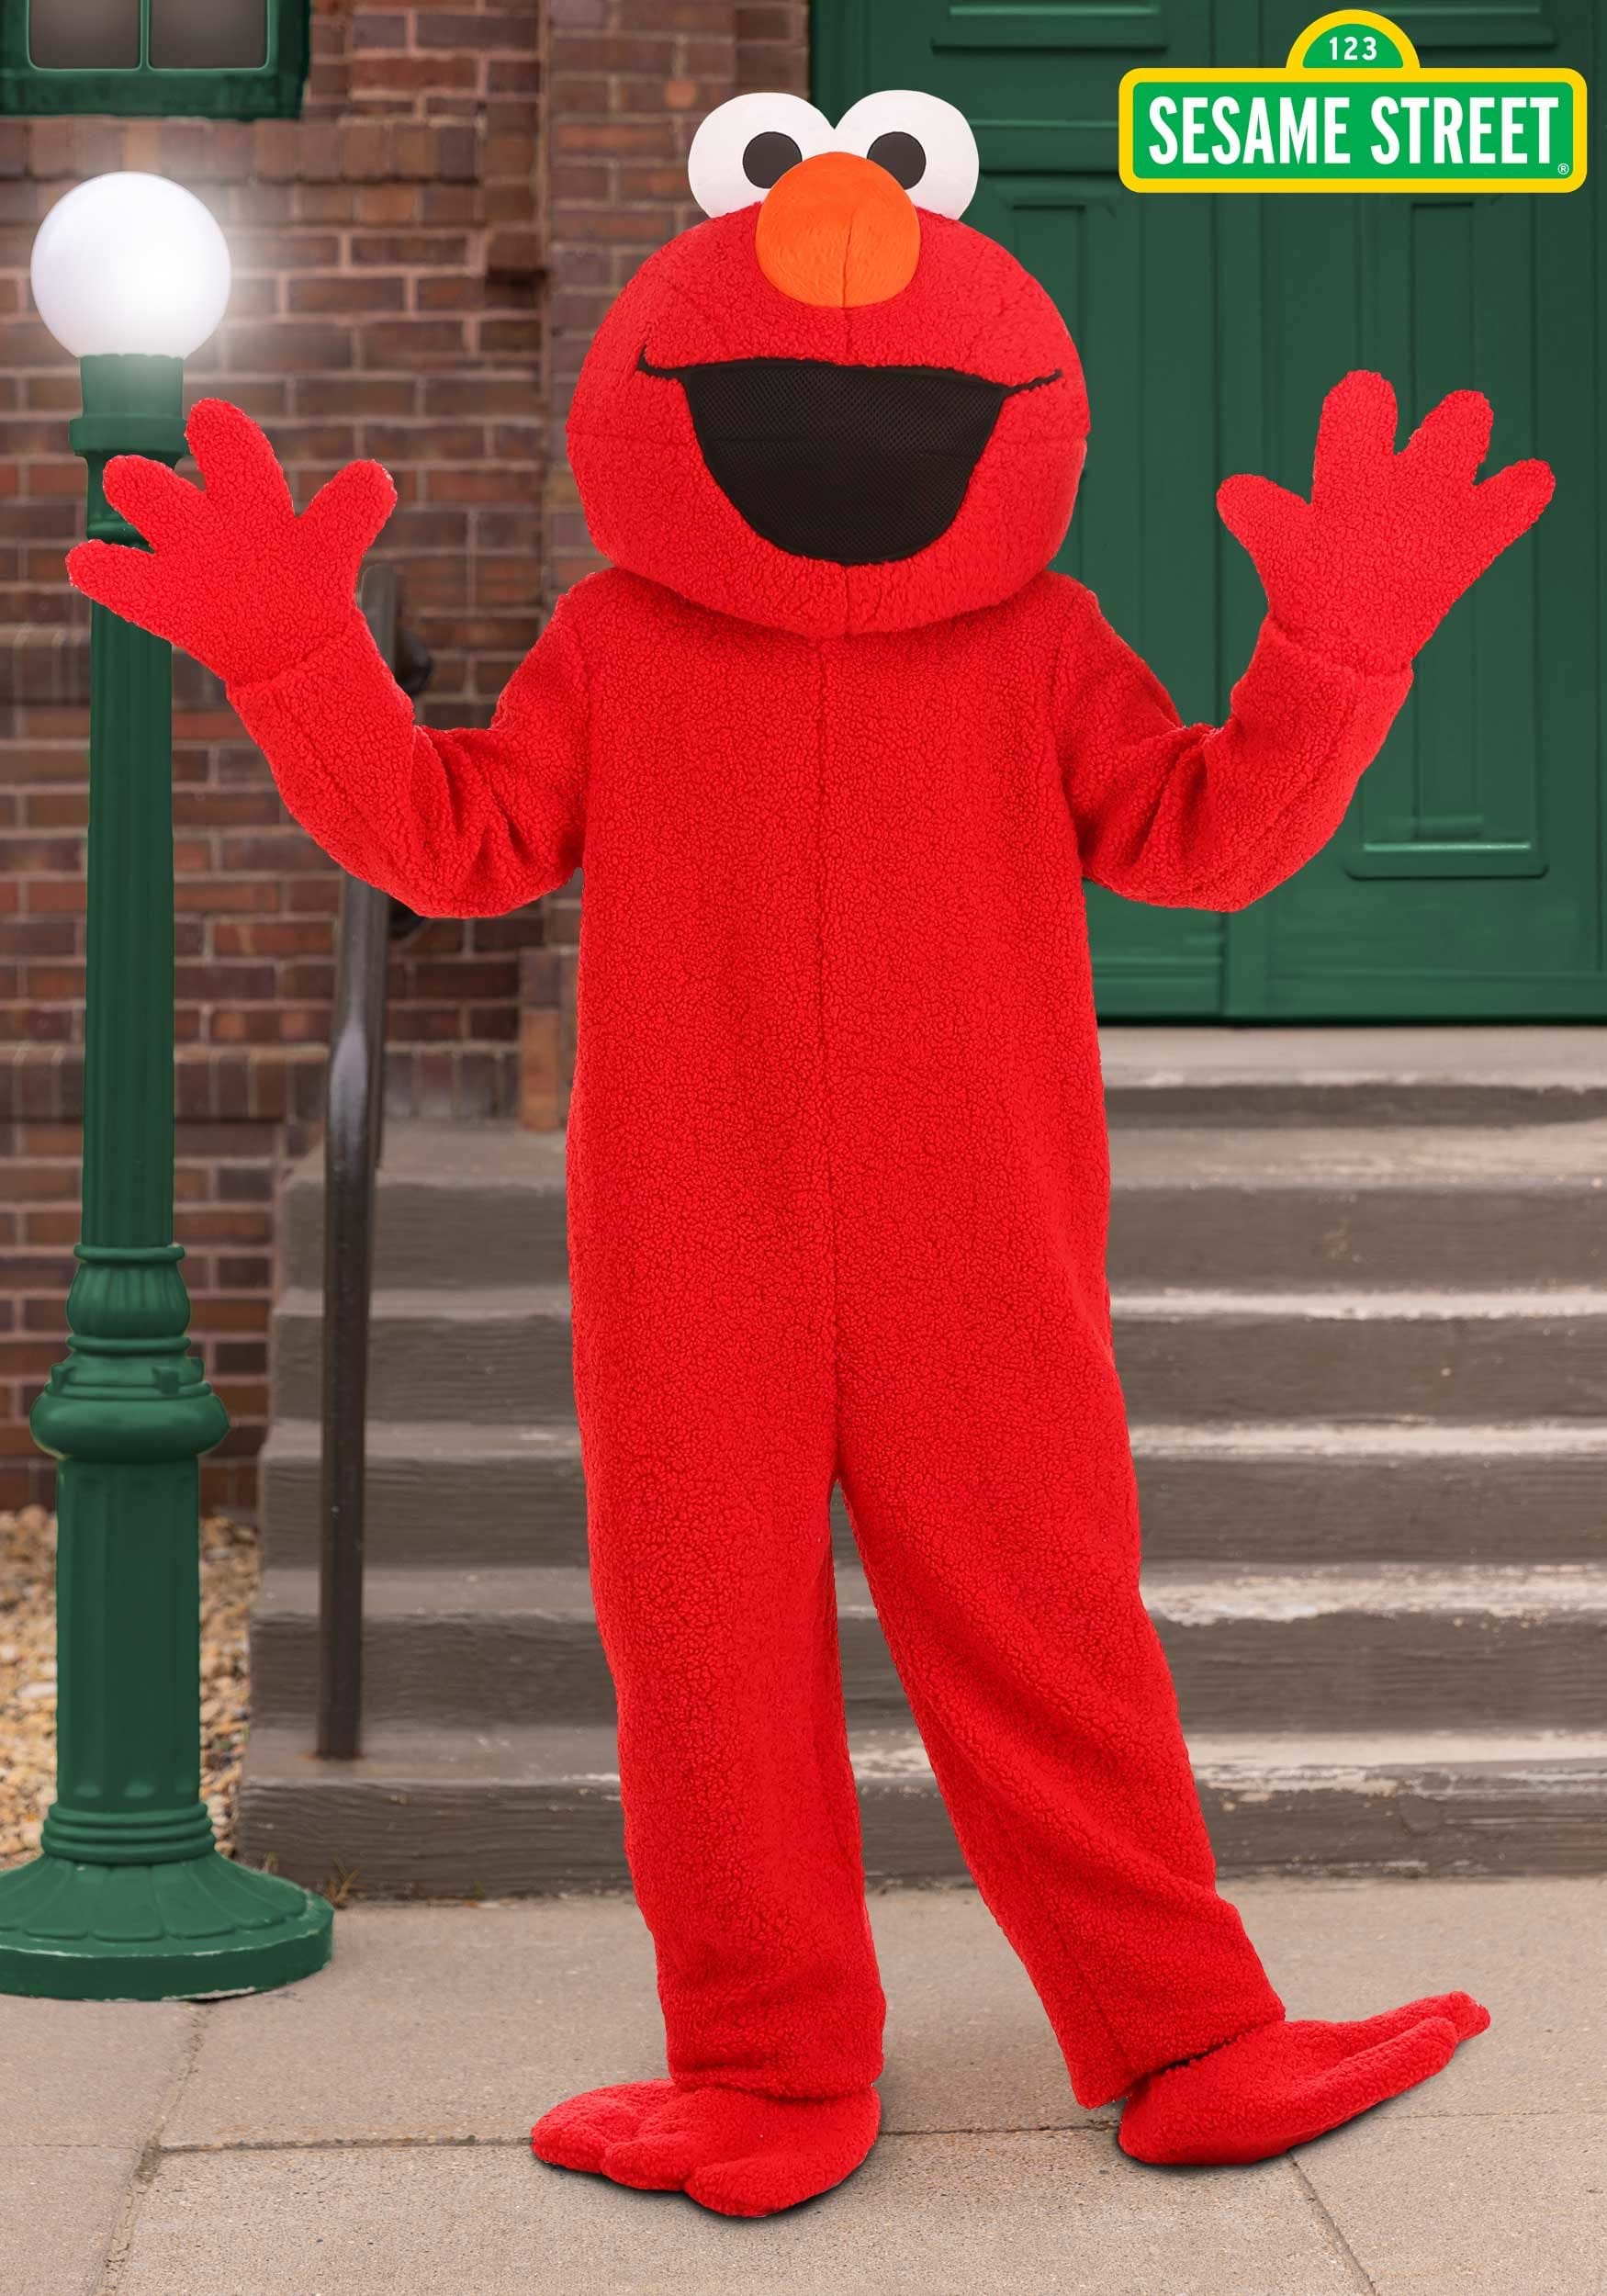 Elmo Sesame Street Red Adult Mascot Costume SHOES Birthday Party Dress Up NEW 